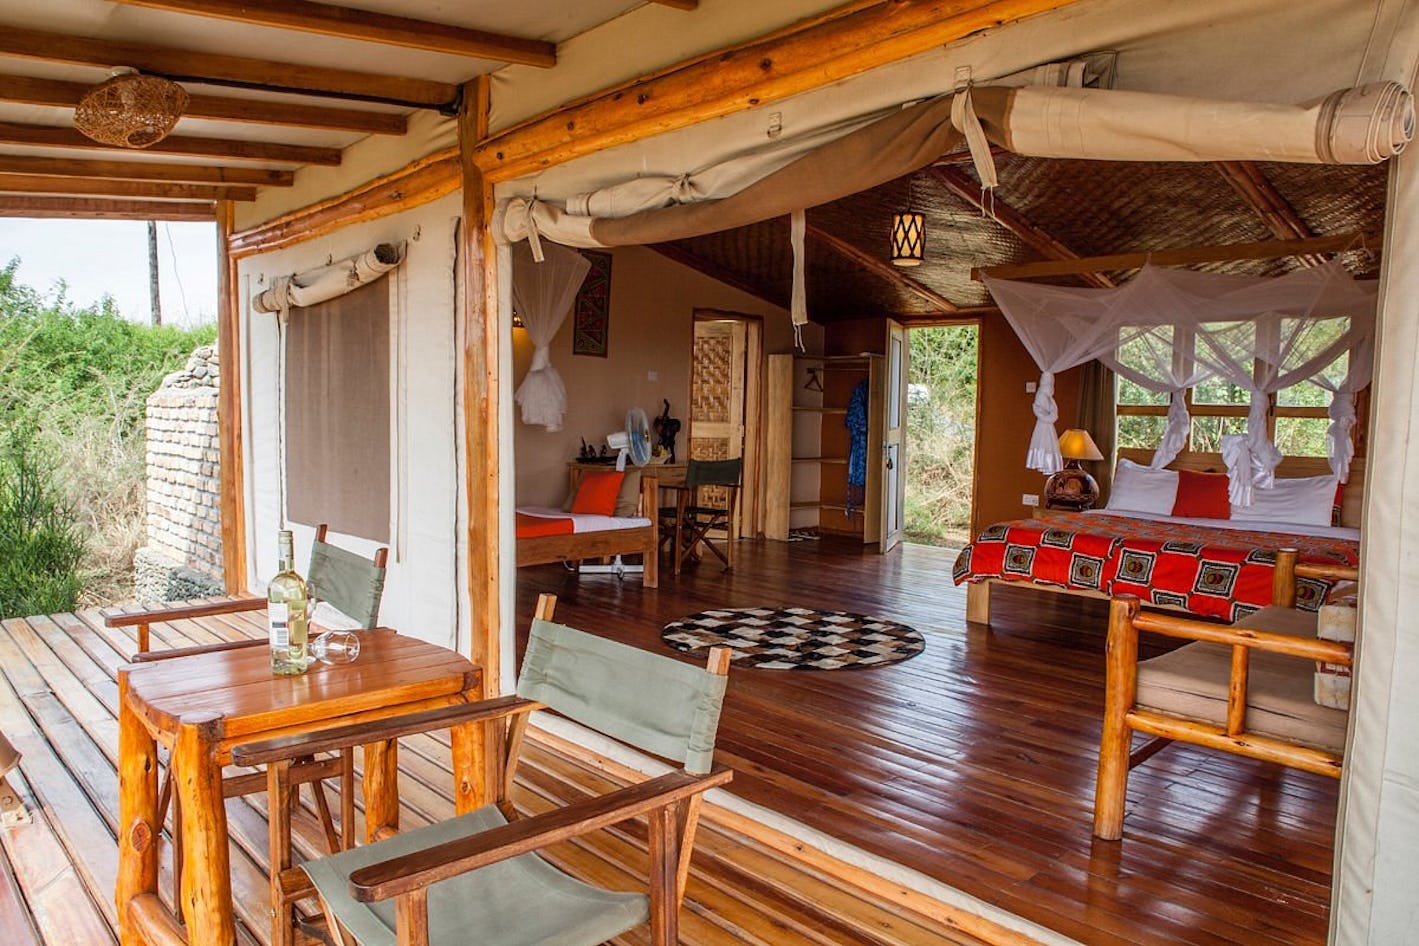 Marafiki Safari Lodge is in a unique location and has been designed and handcrafted using local materials, fitted by artisans from the local community. Overlooking Lake George in the Queen Elizabeth National Park it offers private luxury safari...